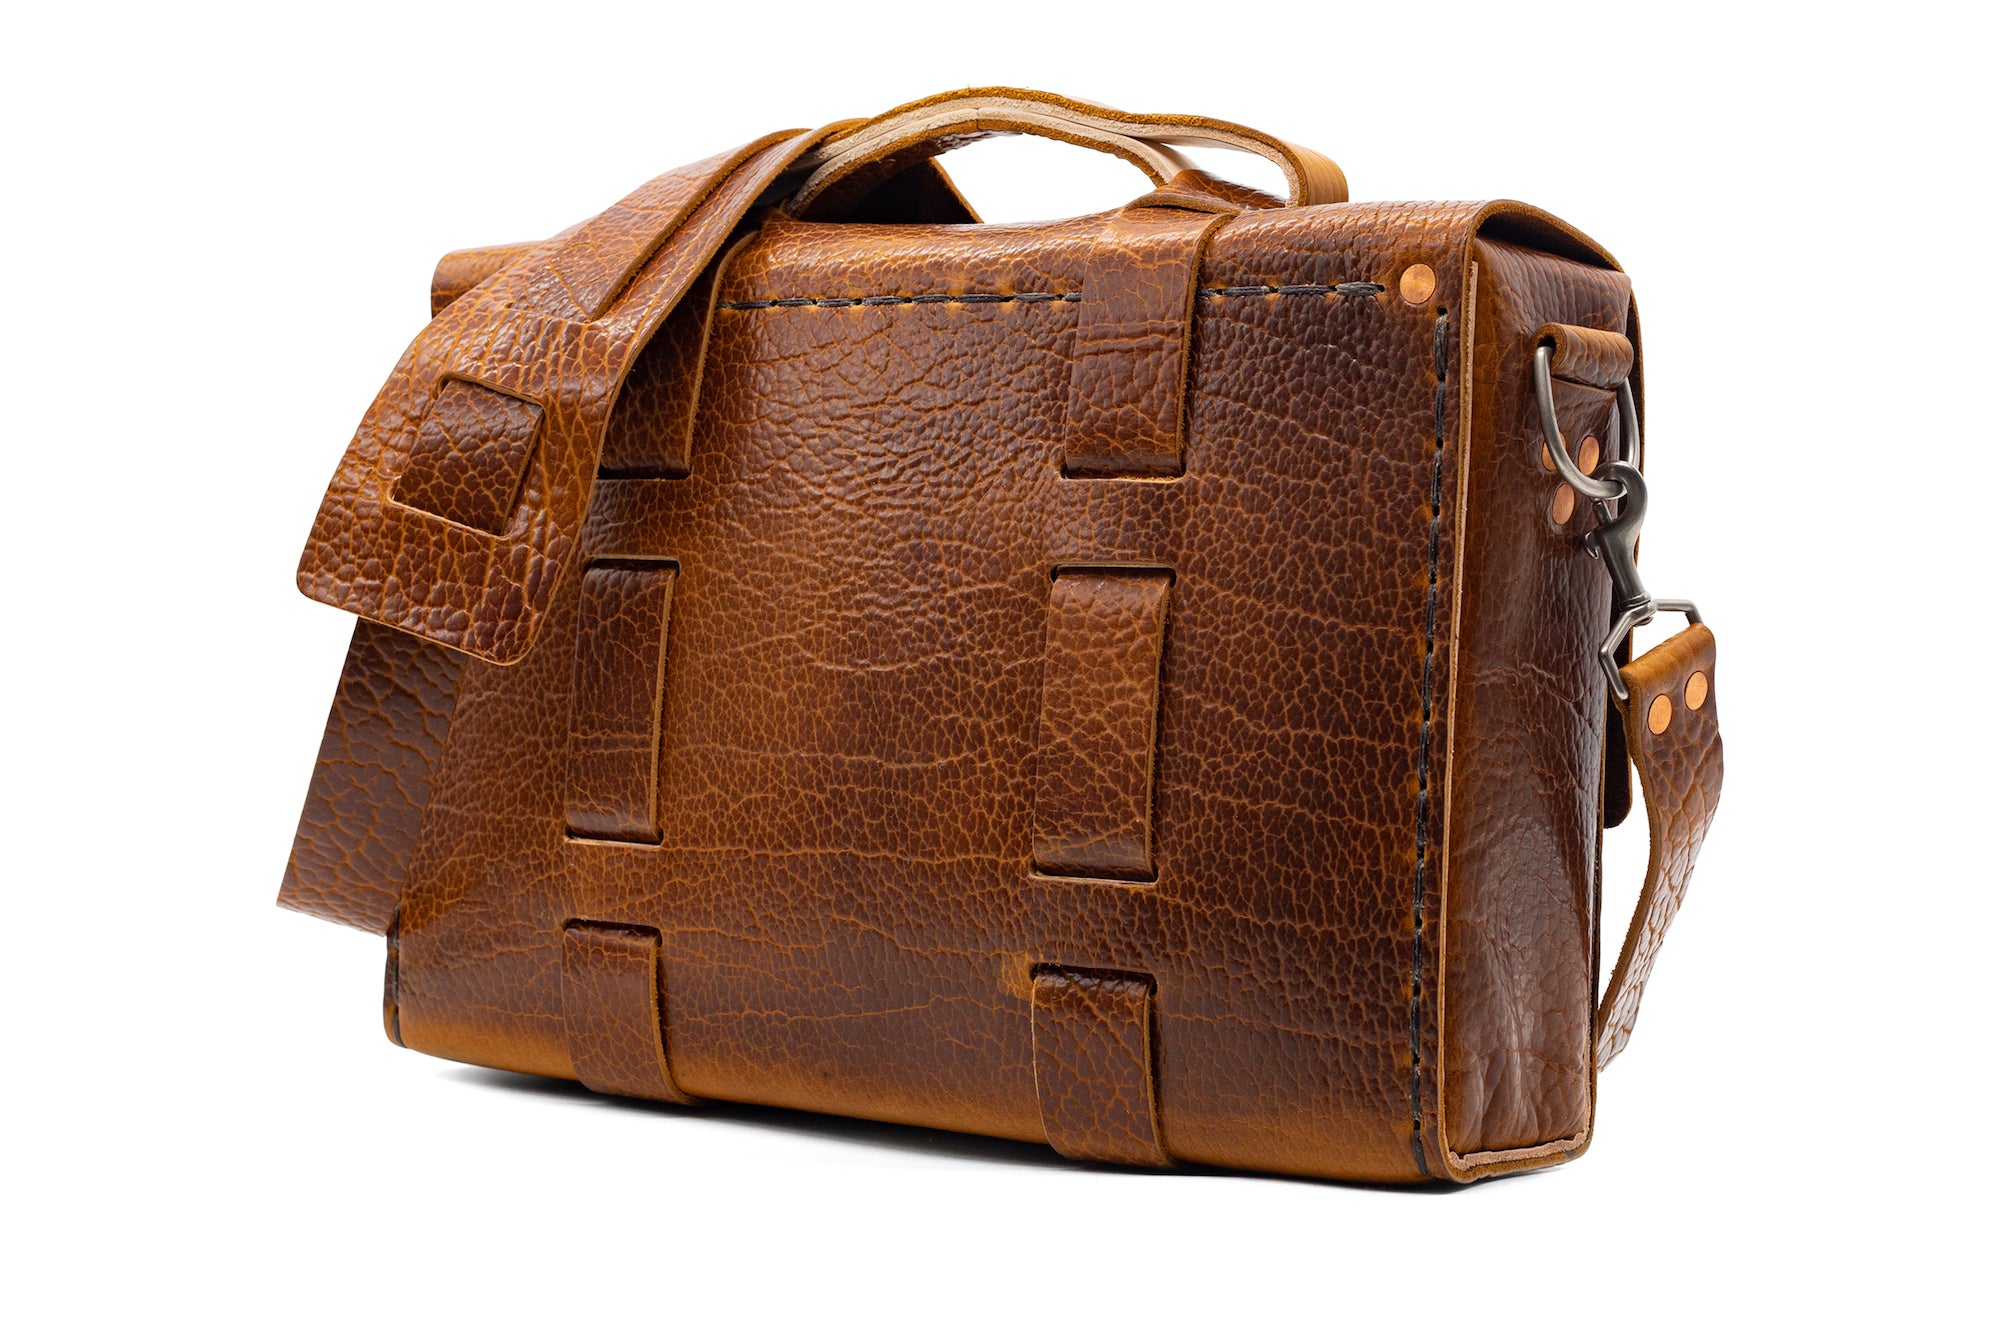 Limited Edition No. 4313 - Minimalist Standard Leather Satchel in Golden Yellowstone - 2 MADE, 0 Left